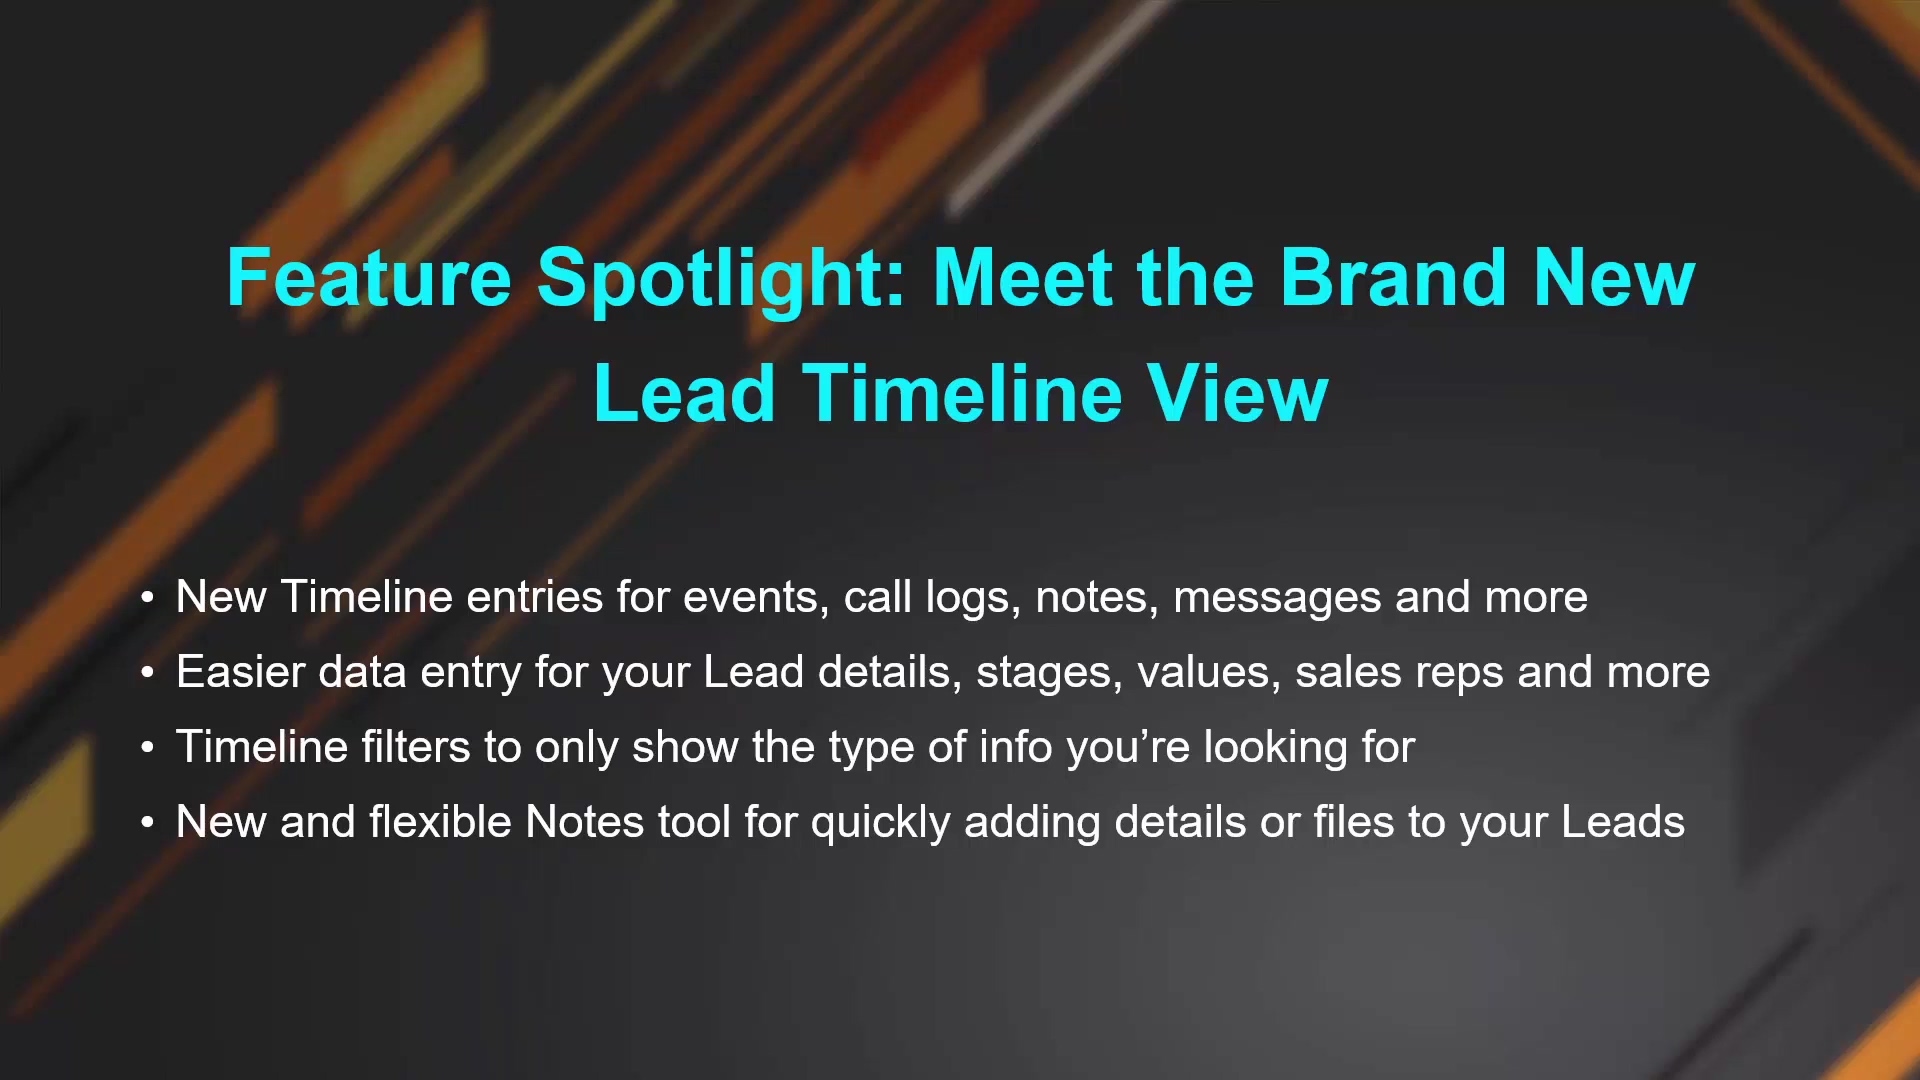 Feature Spotlight - Meet the Brand New Lead Timeline View_1